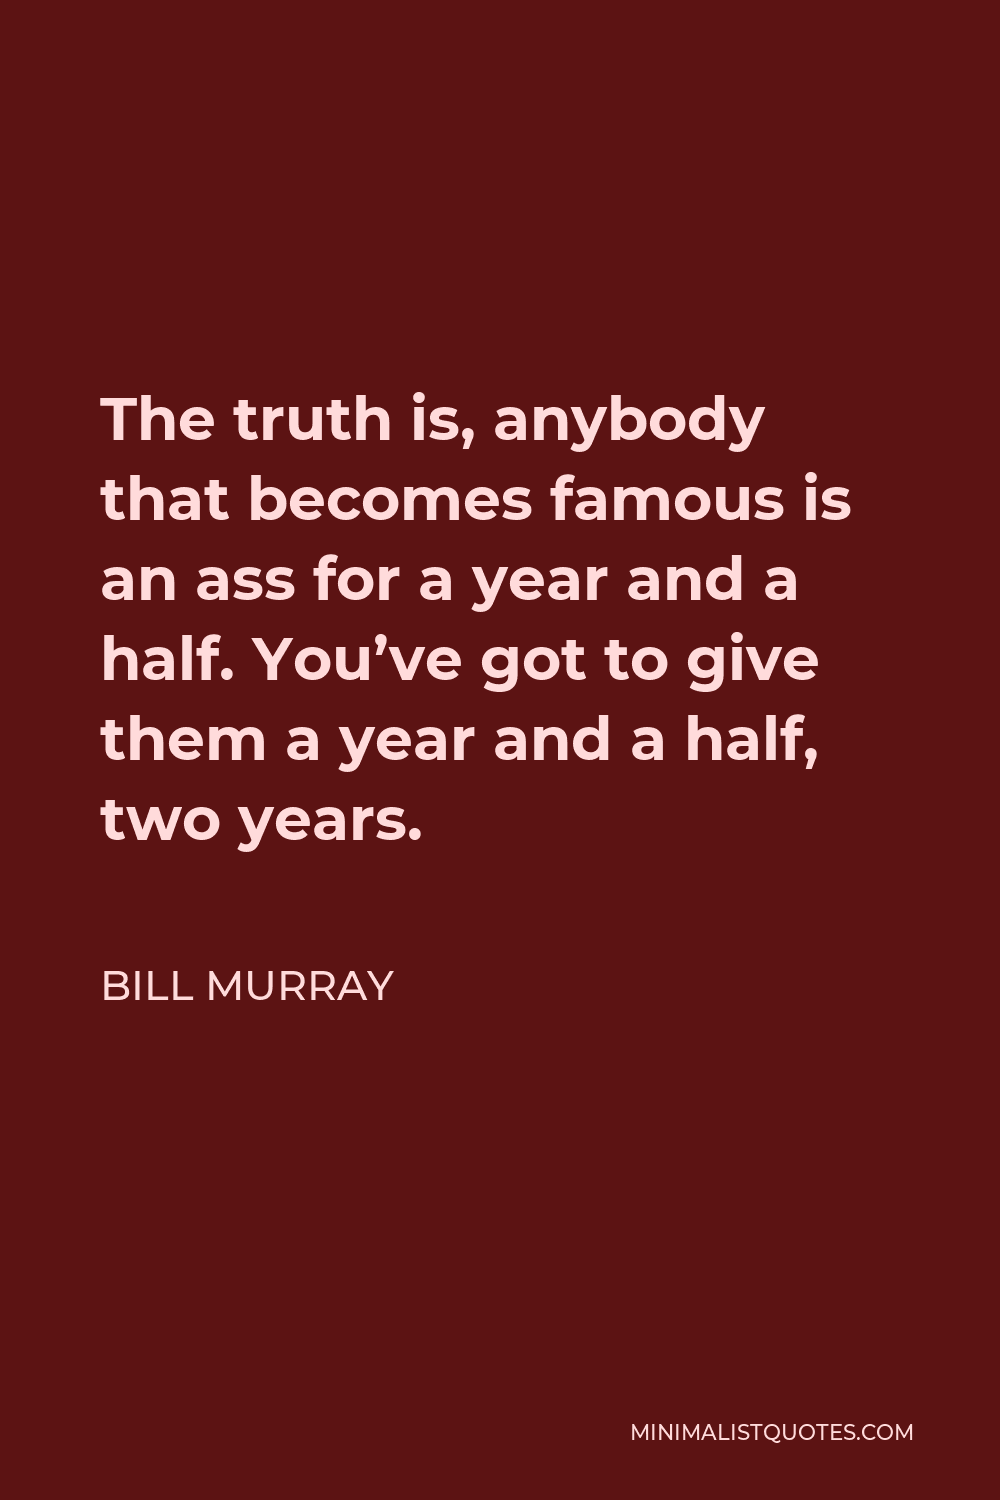 Bill Murray Quote - The truth is, anybody that becomes famous is an ass for a year and a half. You’ve got to give them a year and a half, two years.